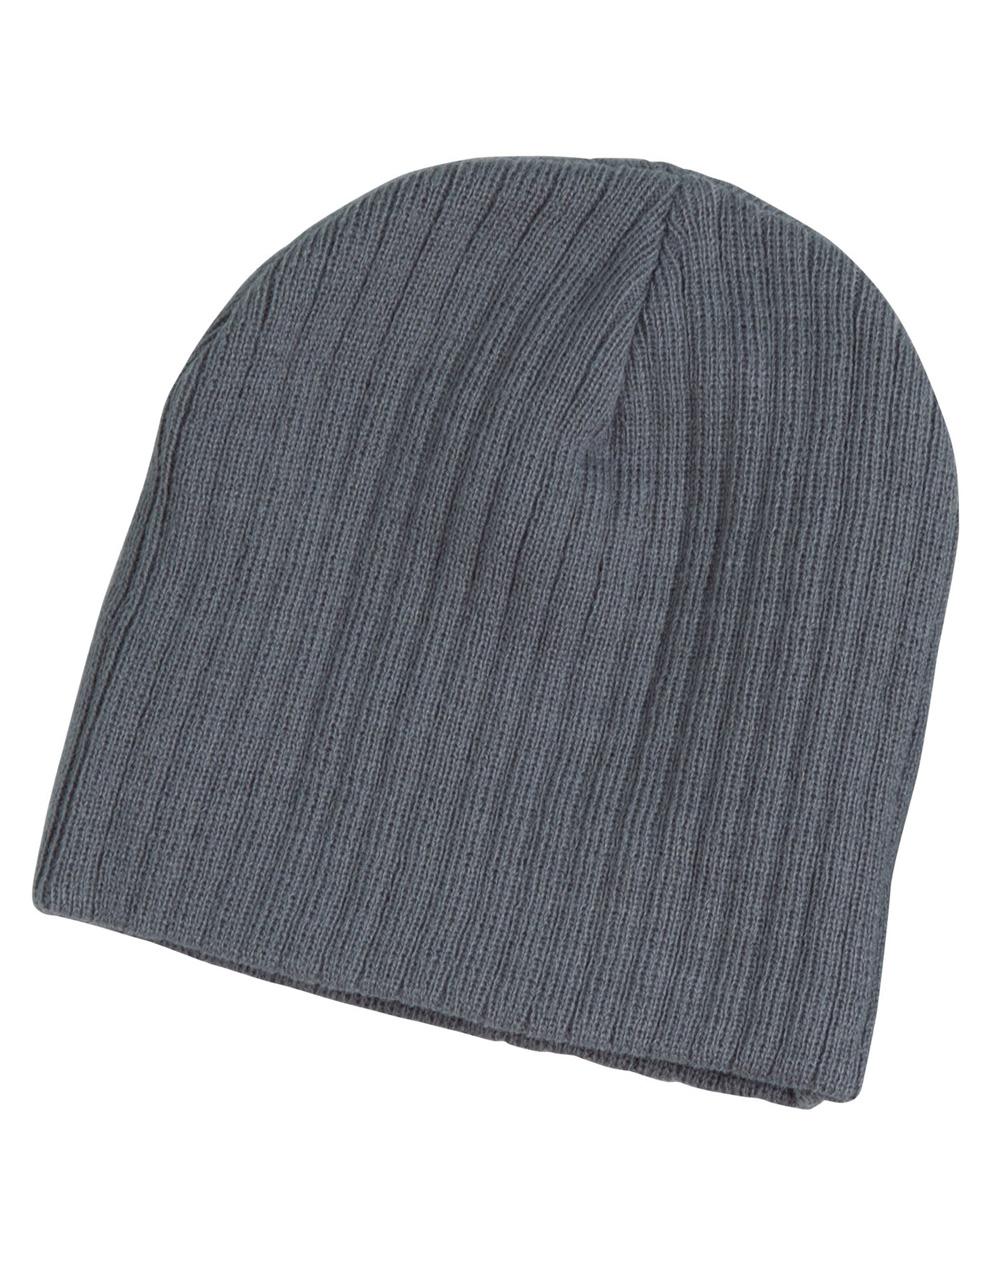 THE CABLE KNIT BEANIE